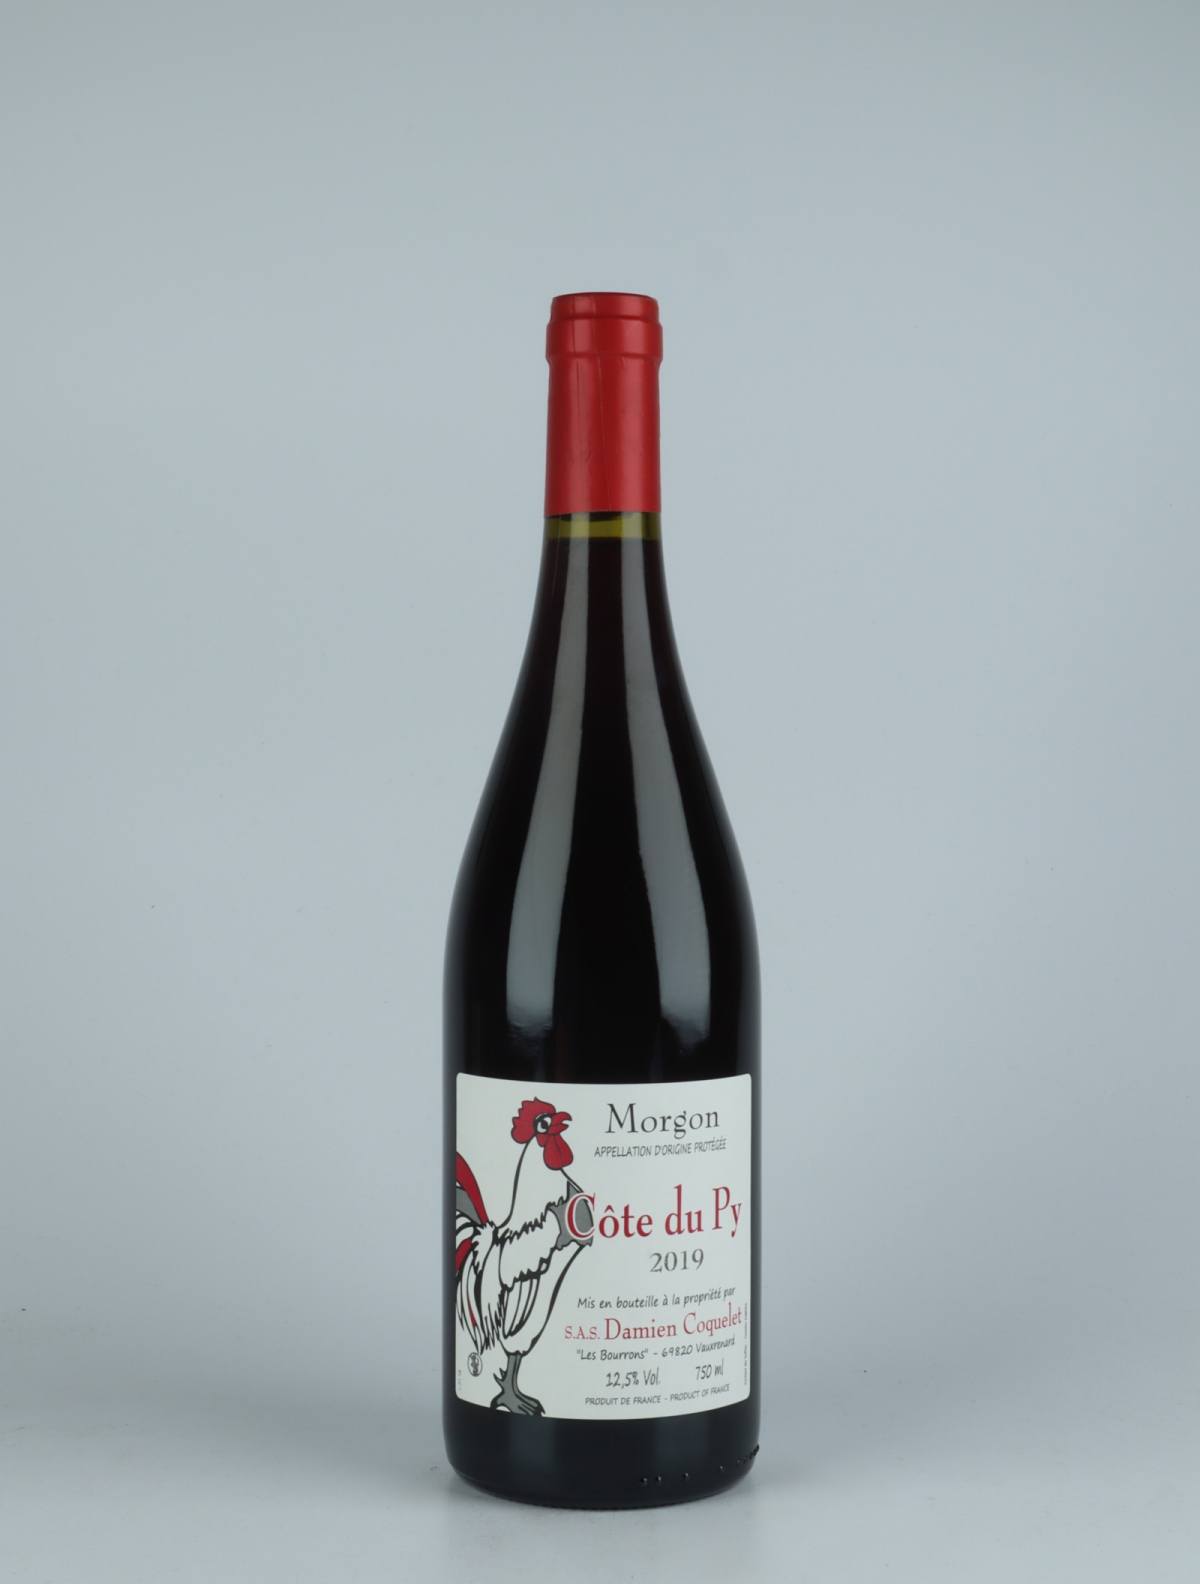 A bottle 2019 Morgon - Côte du Py Red wine from Damien Coquelet, Beaujolais in France